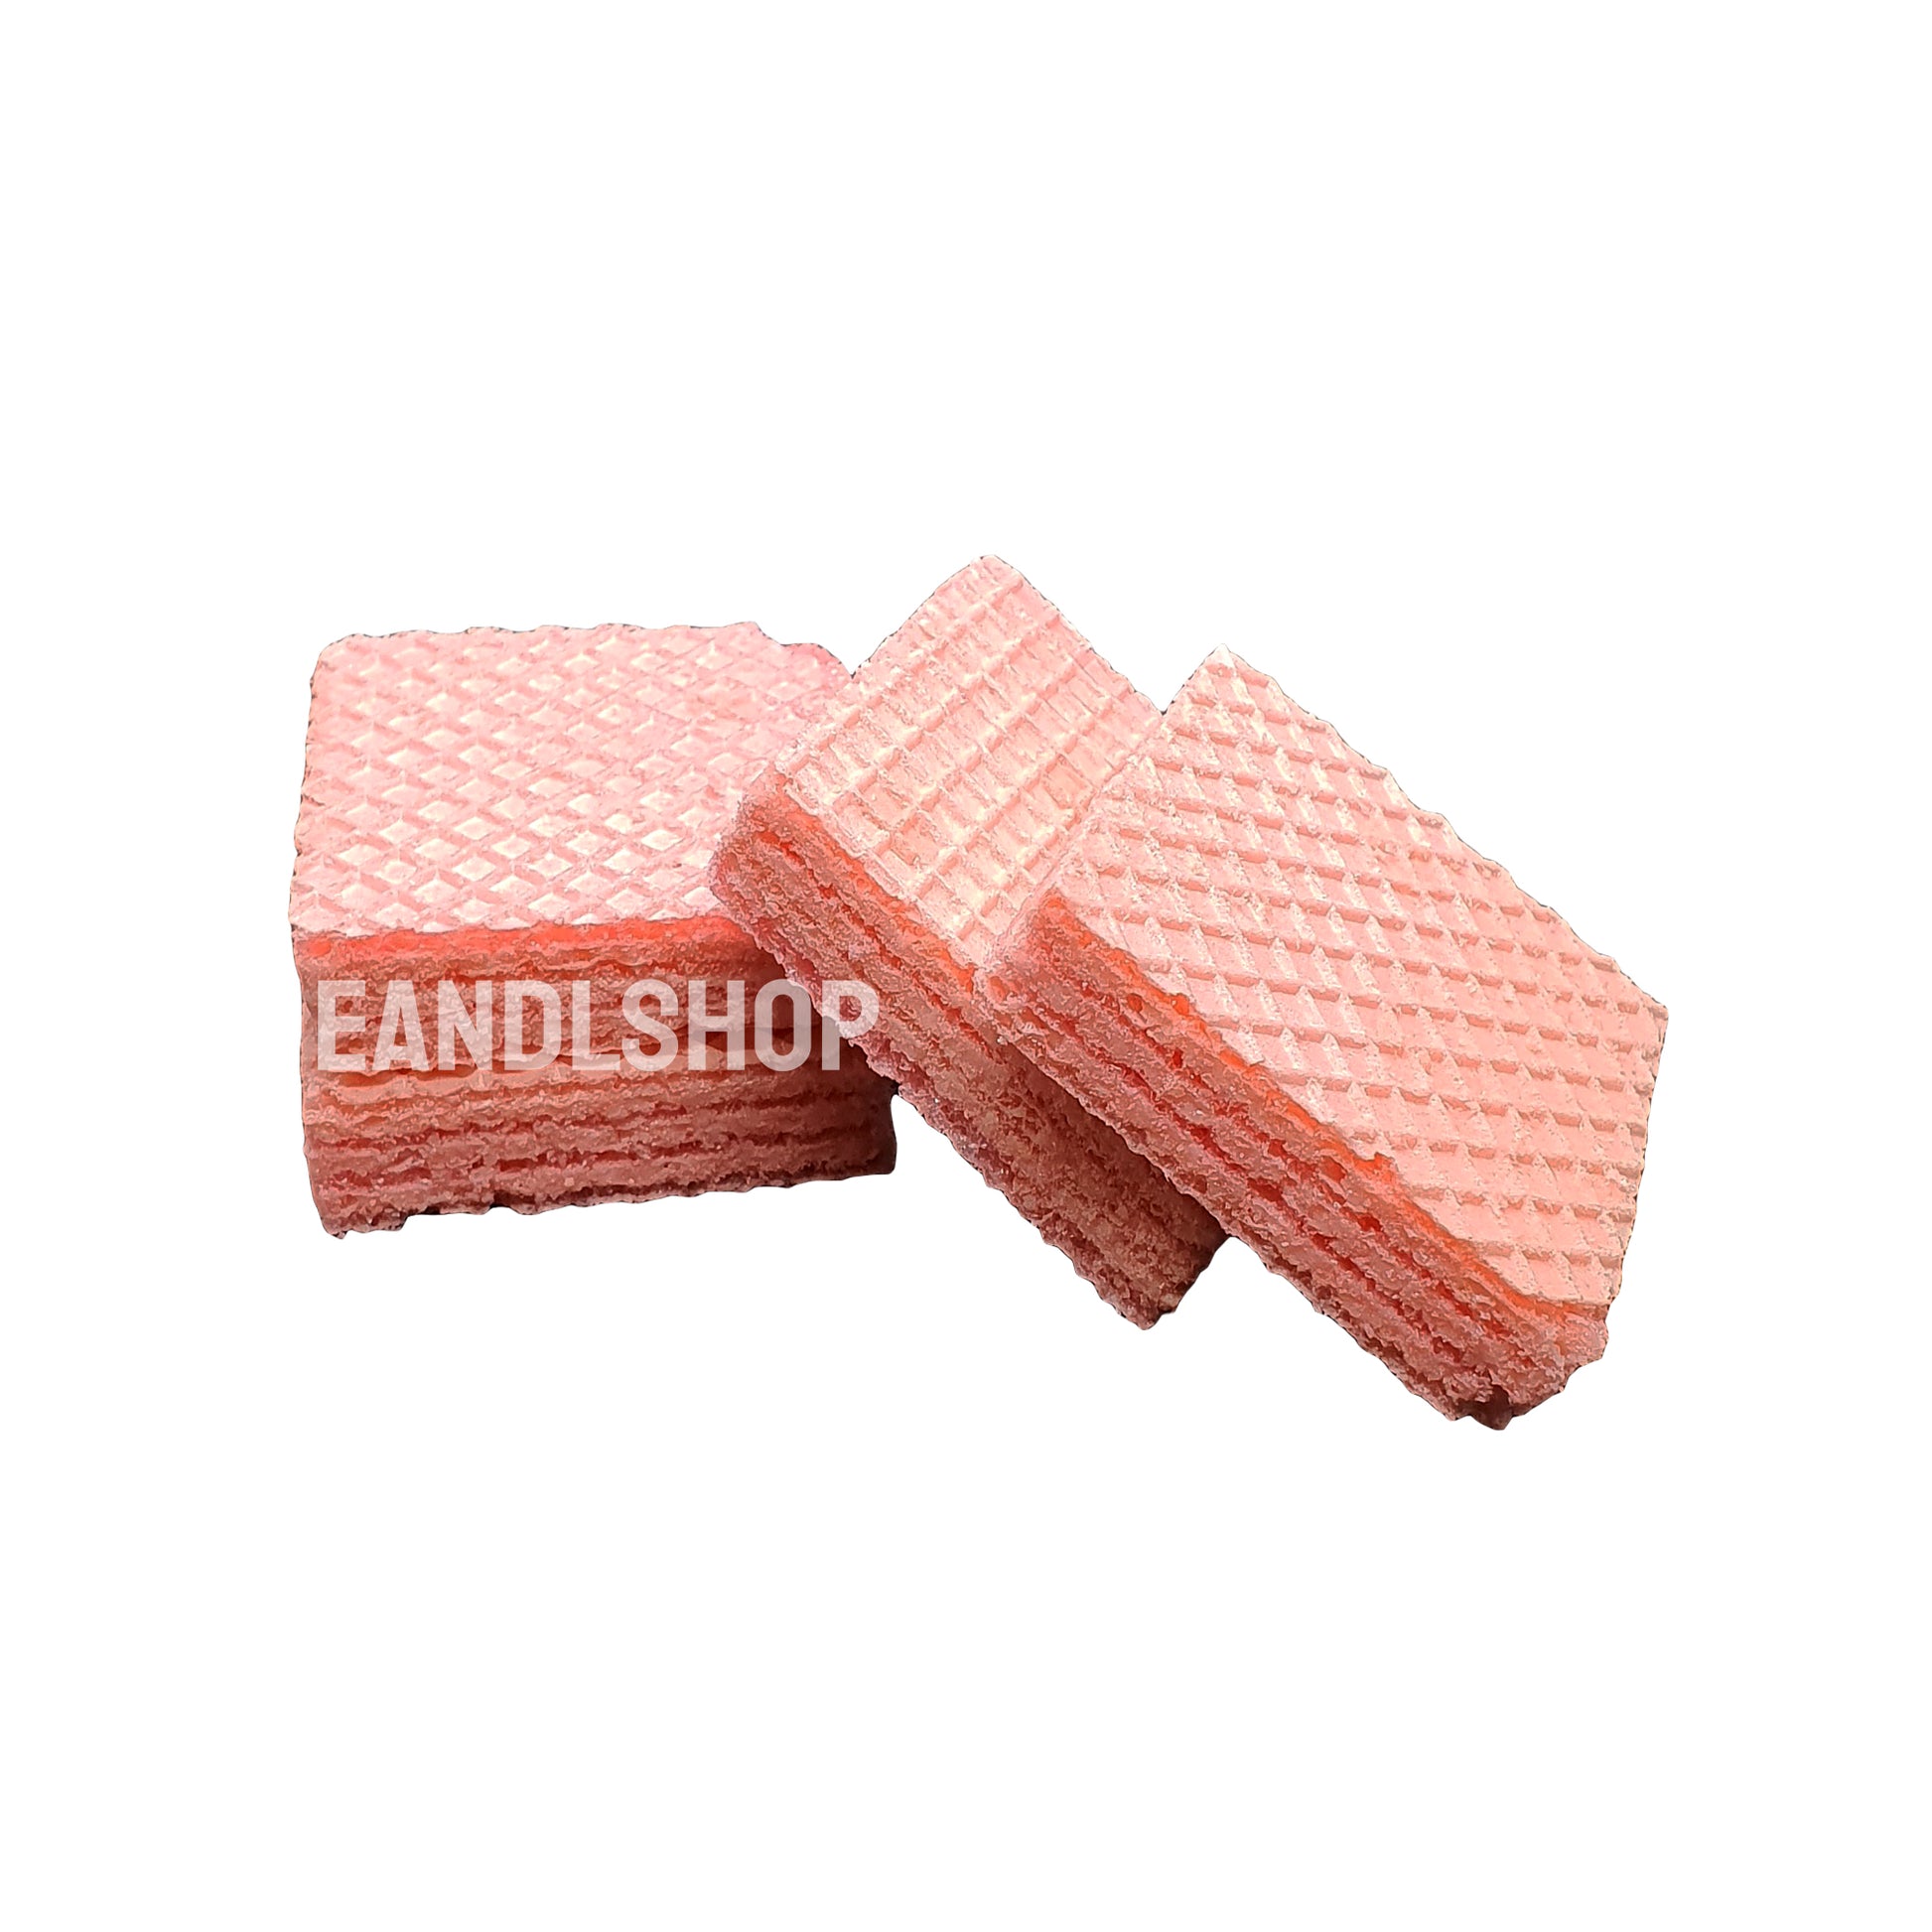 Strawberry Wafer (Square). Old-school biscuits, modern snacks (chips, crackers), cakes, gummies, plums, dried fruits, nuts, herbal tea – available at www.EANDLSHOP.com